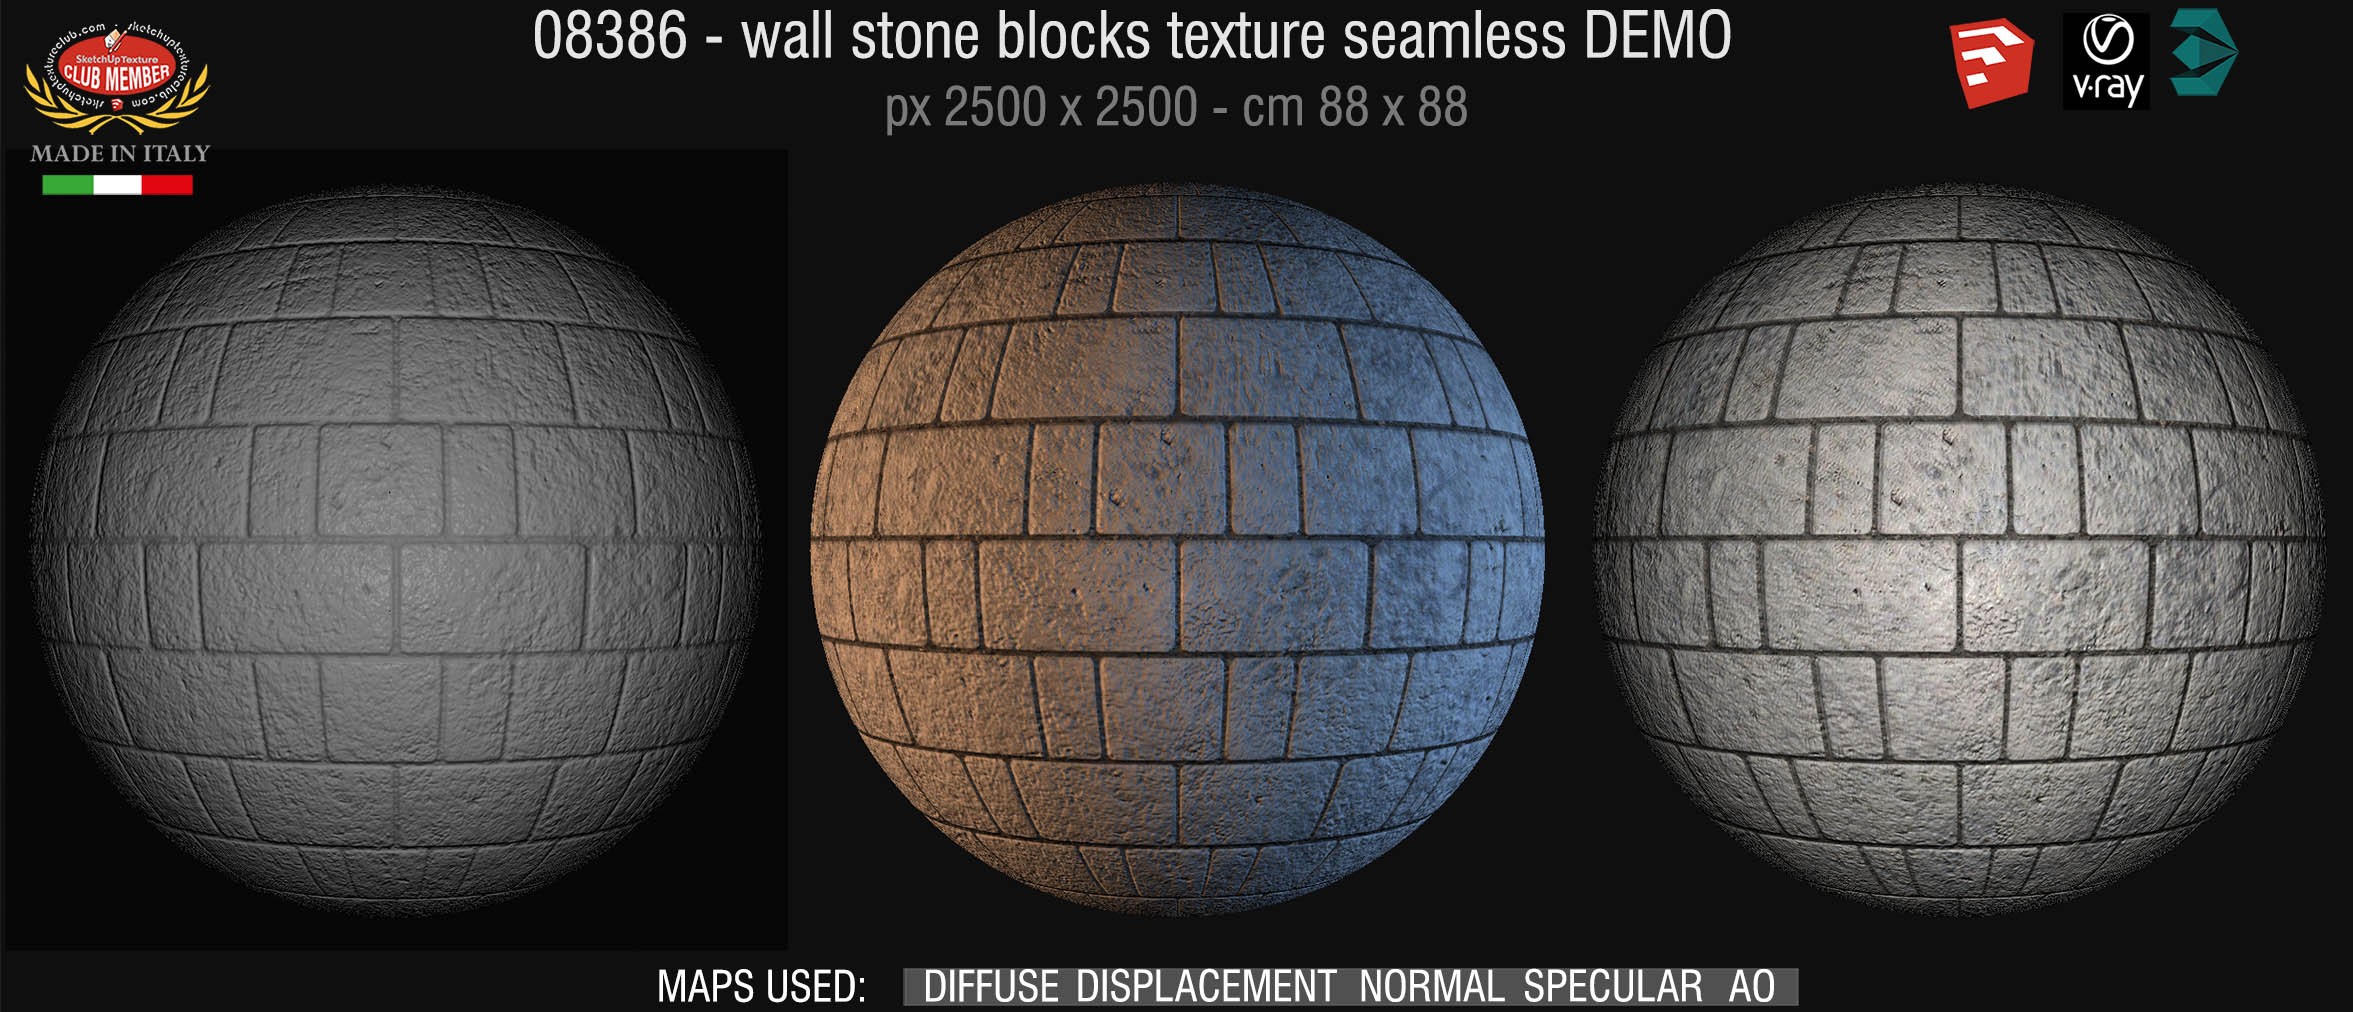 08386 HR Wall stone with regular blocks texture + maps DEMO